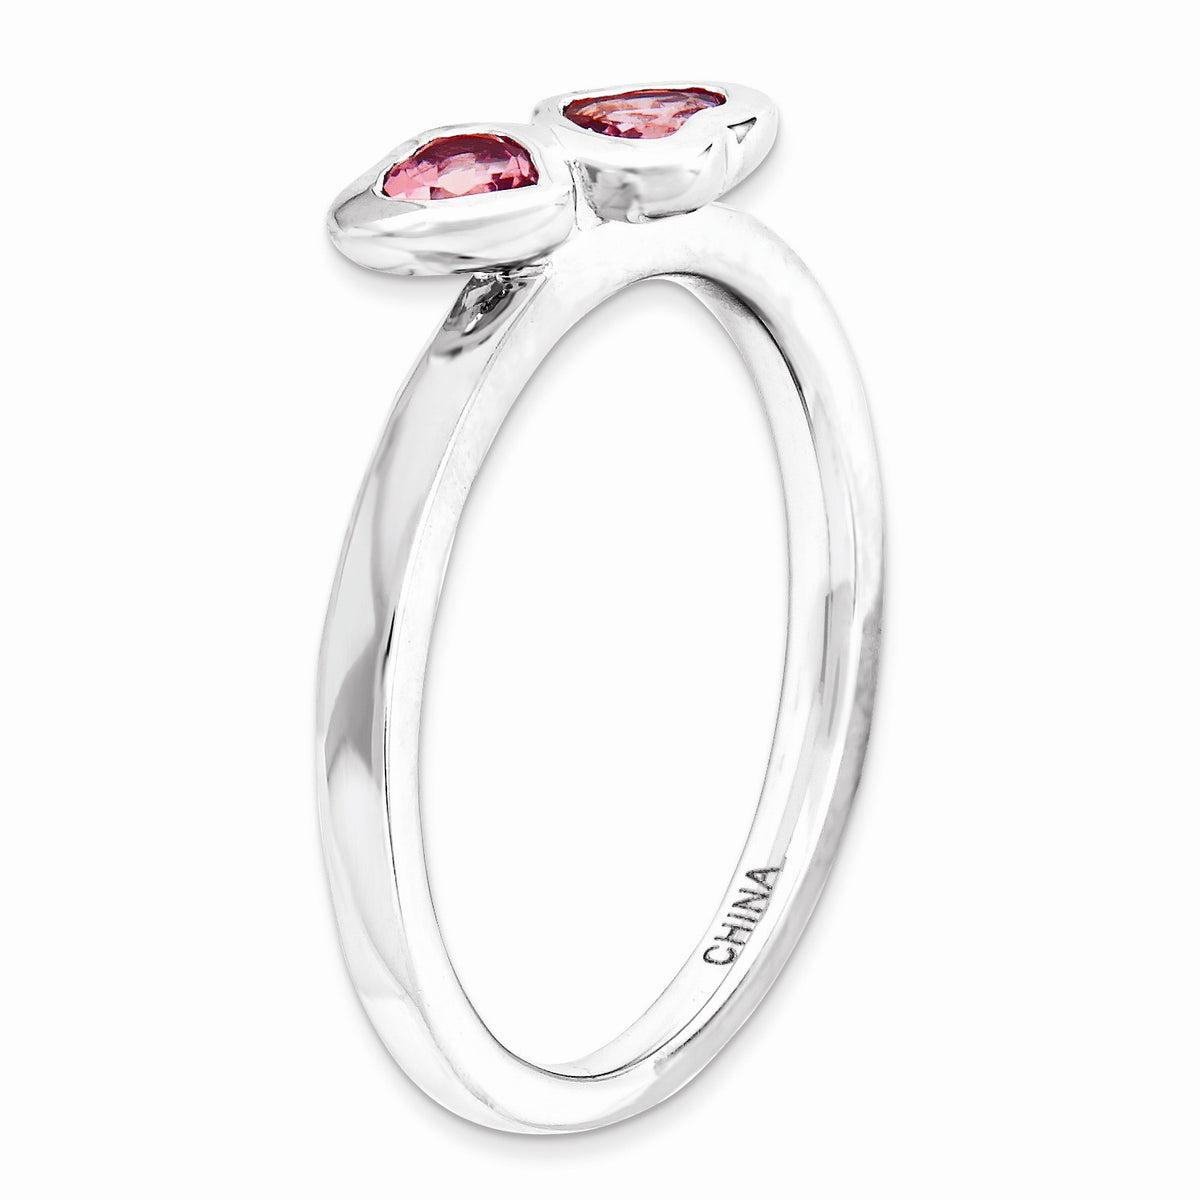 Alternate view of the Sterling Silver Stackable Double Heart Pink Tourmaline Ring by The Black Bow Jewelry Co.